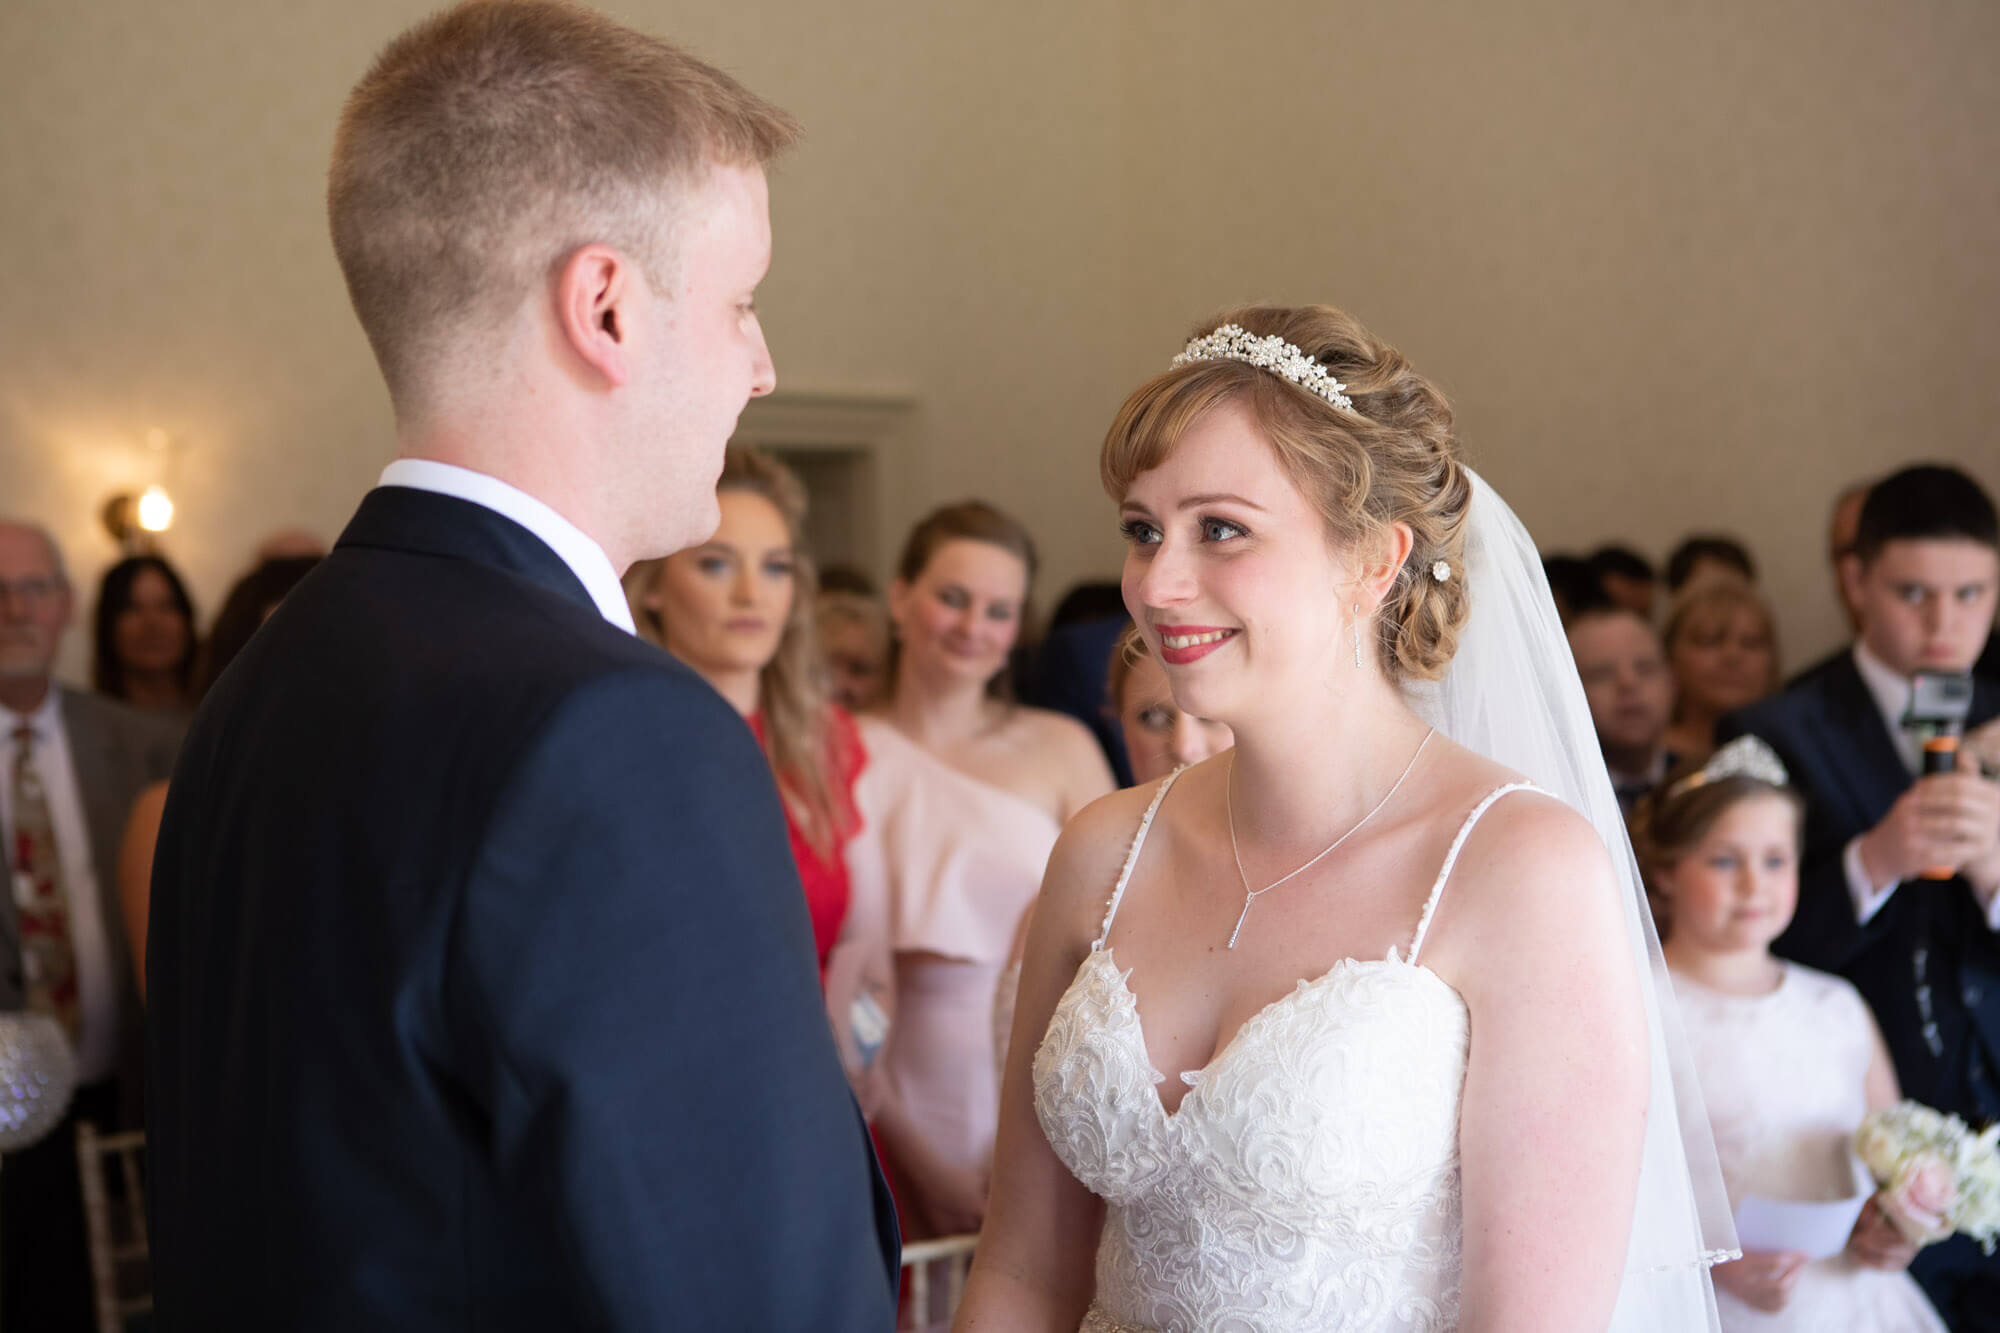 the bride looks smilingly at her groom as they say their wedding vows